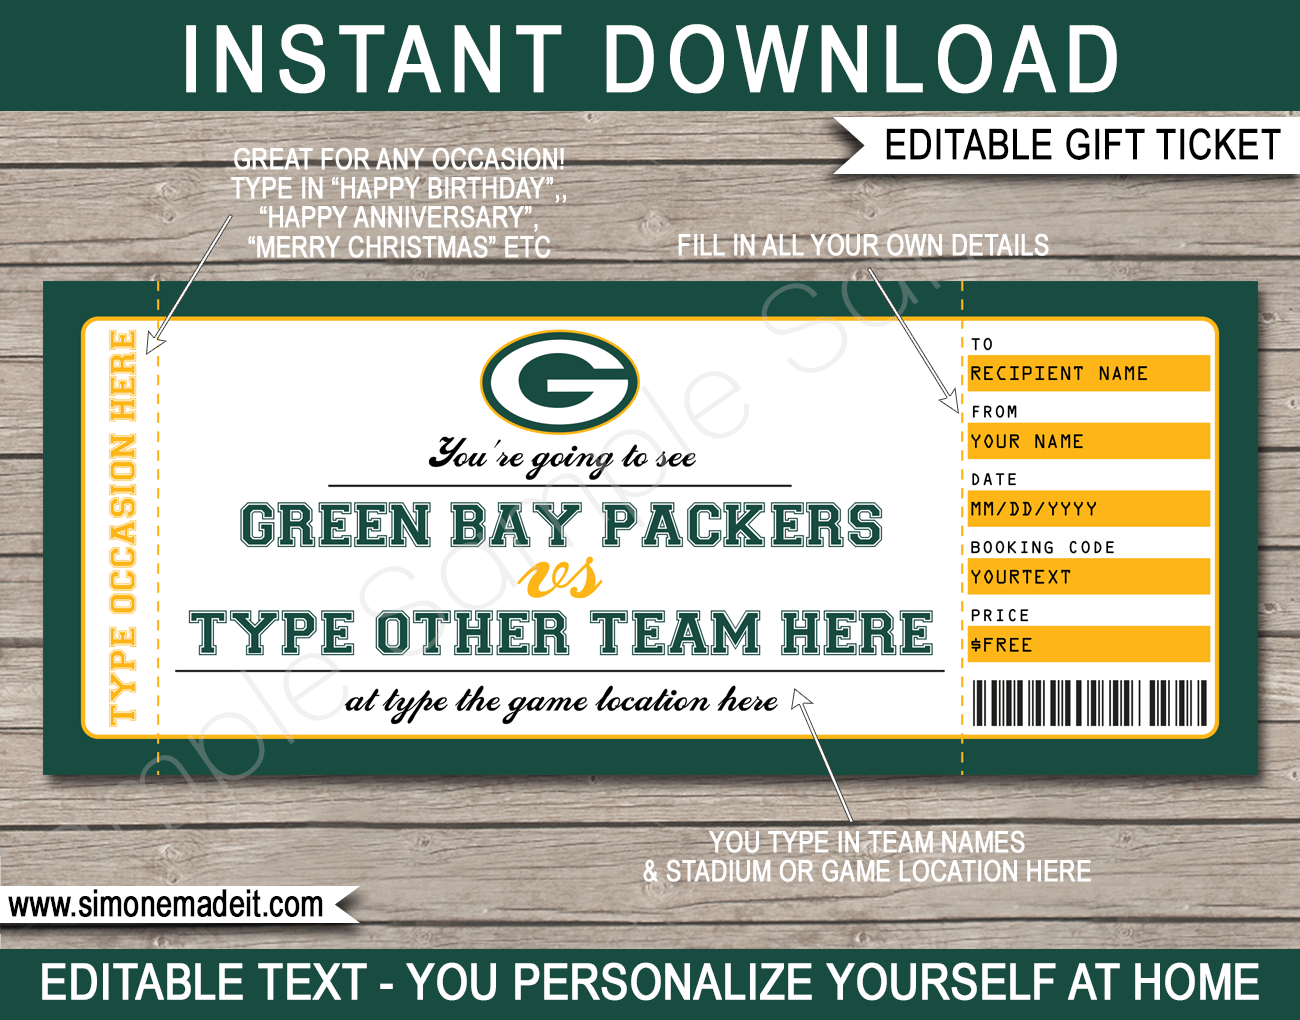 tickets packers com